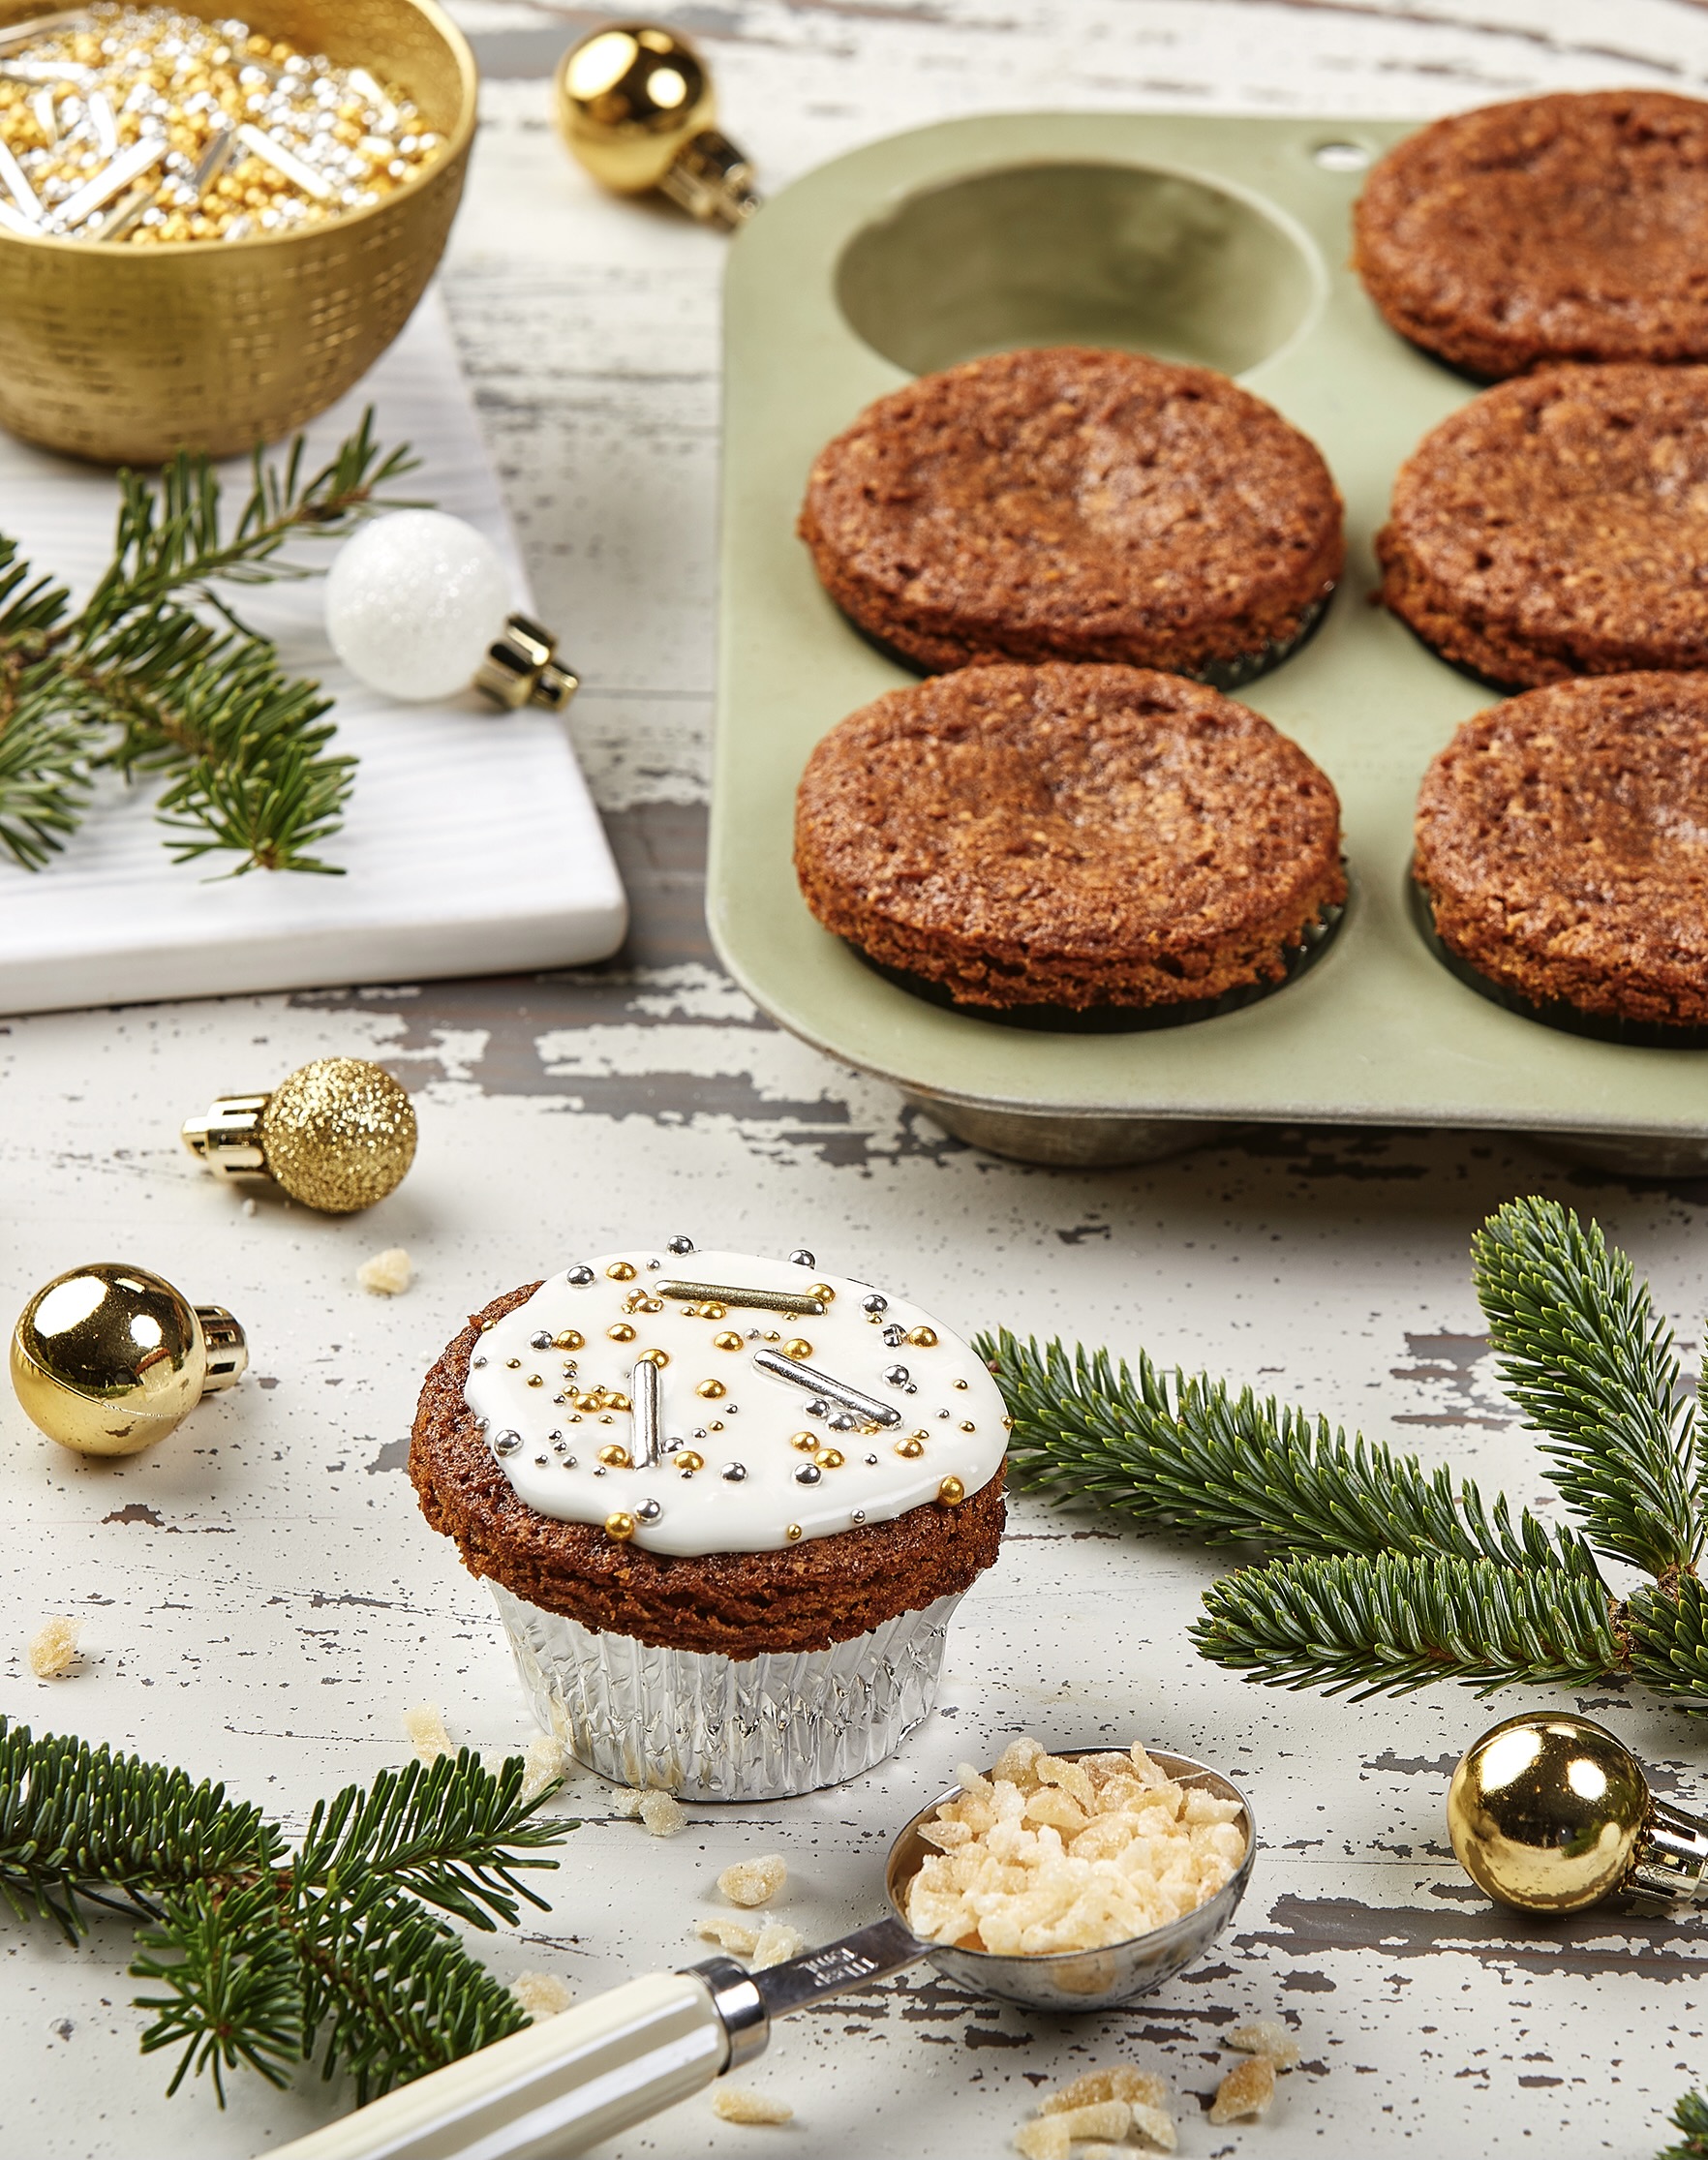 Brown muffin with white glaze and silver and gold sprinkles with evergreen sprigs and mini ornaments in the foreground and background.